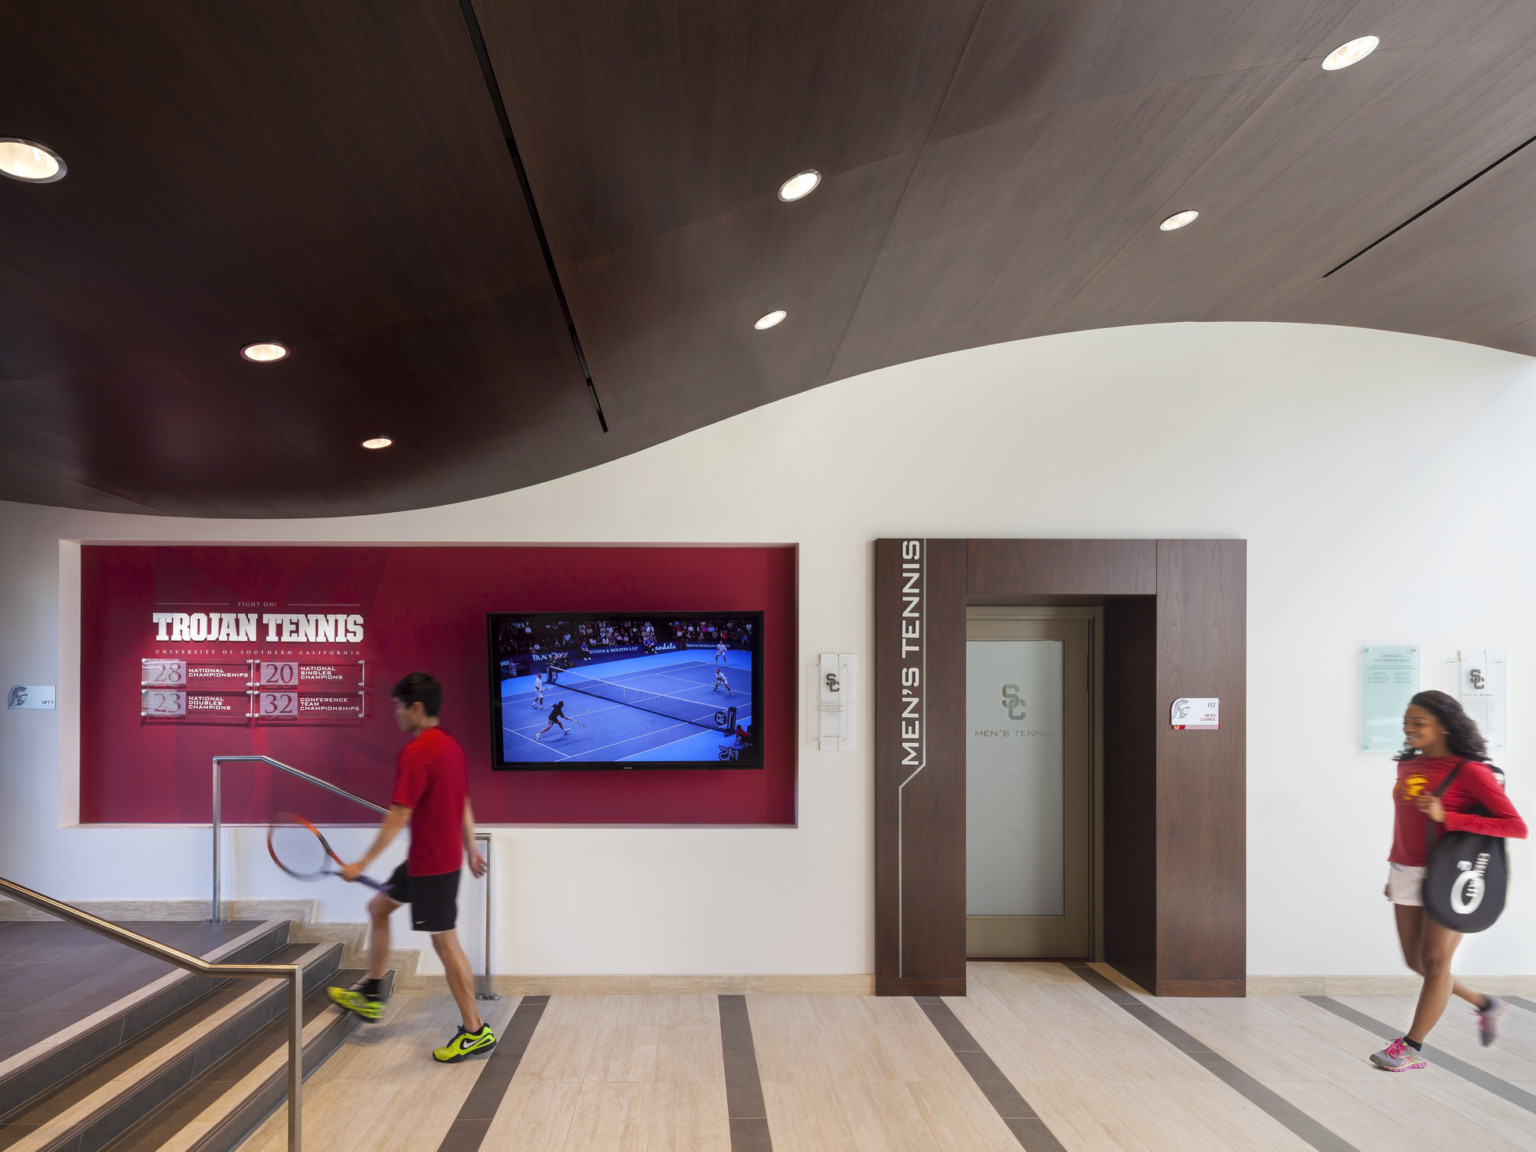 Curving wood ceiling over hallway. Red recessed wall detail with screen and Trojan Tennis sign by two tone steps